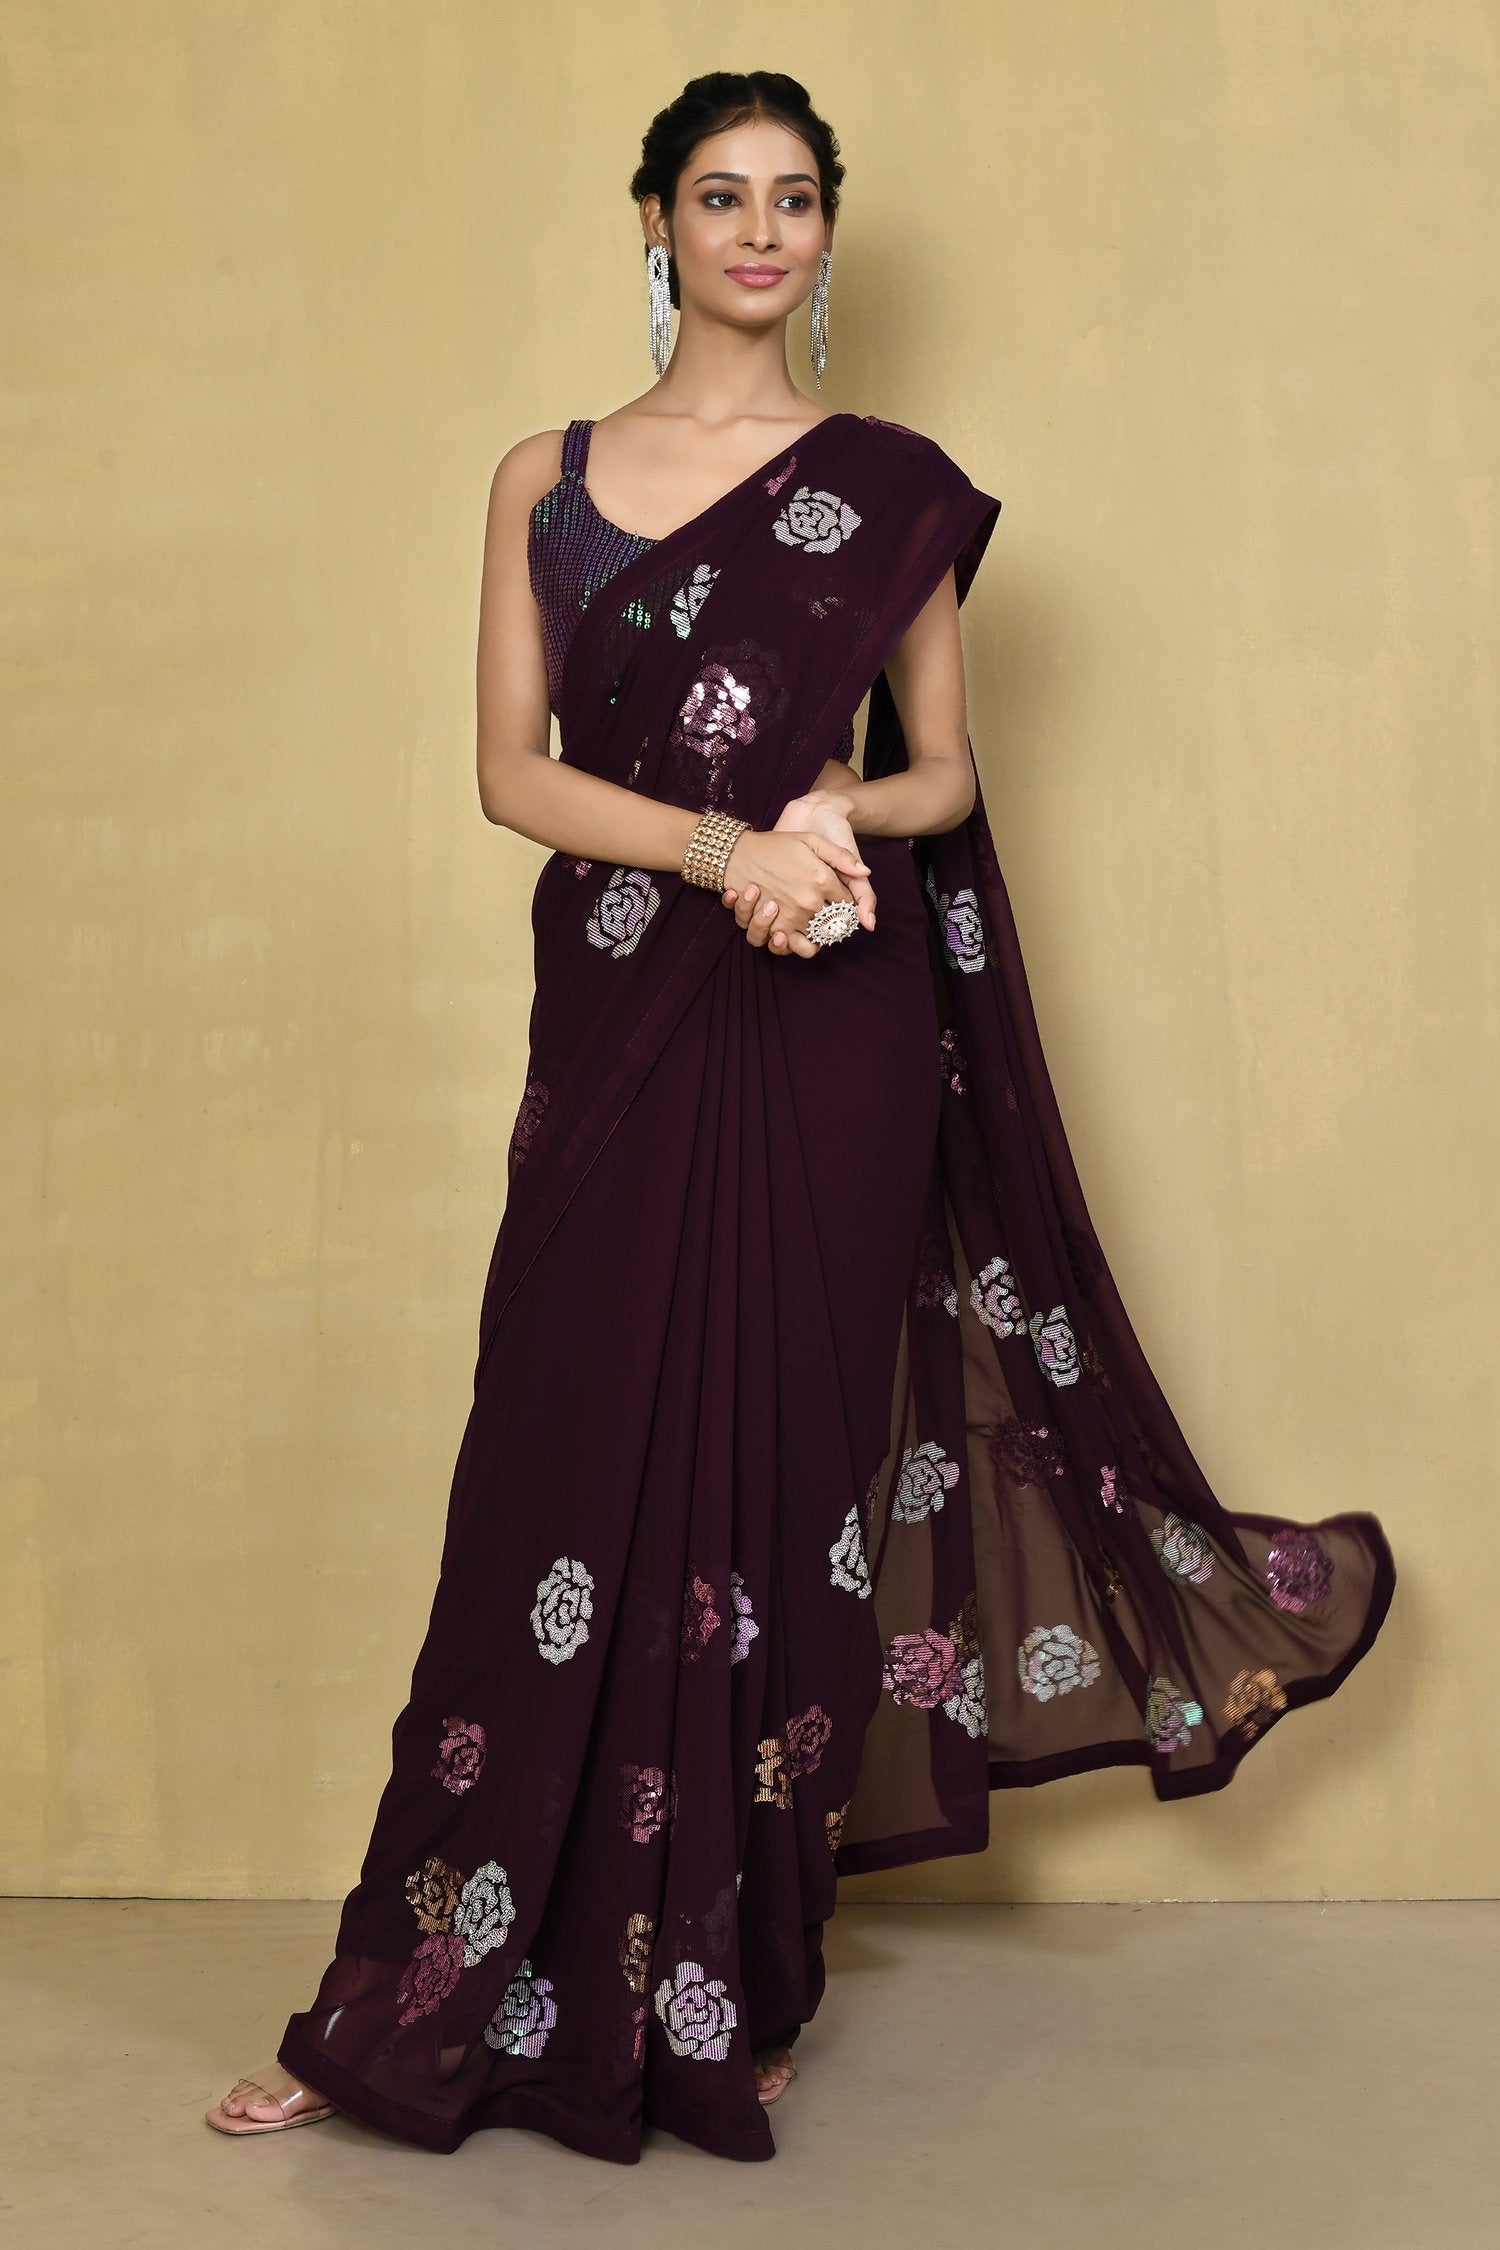 Beautiful Wine multi Color 4 type sequin flower work with back patch piping border Saree For Women